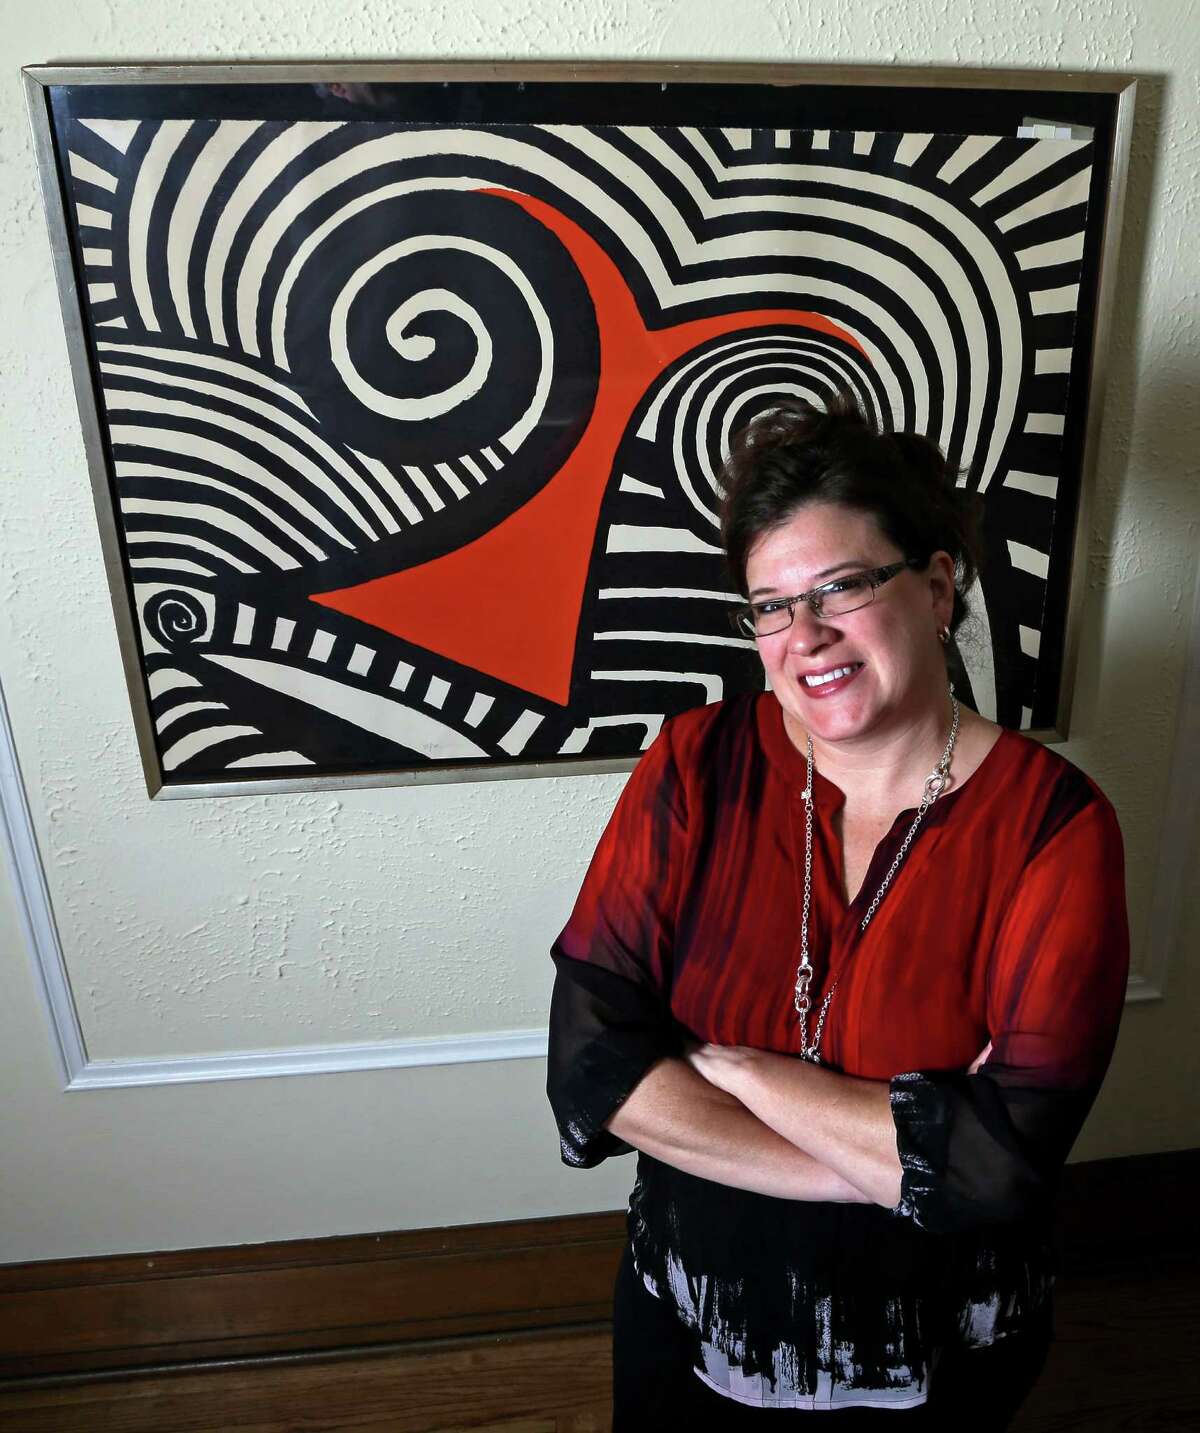 In this Wednesday, Nov. 28, 2012 photo, Karen Mallet stands in front of her Alexander Calder print in her Shorewood, Wis., home. Mallet bought the print for $12.34 at a Goodwill thrift store in Milwaukee. It turned out to be a lithograph by the American artist Alexander Calder worth $9,000. (AP Photo/Morry Gash)